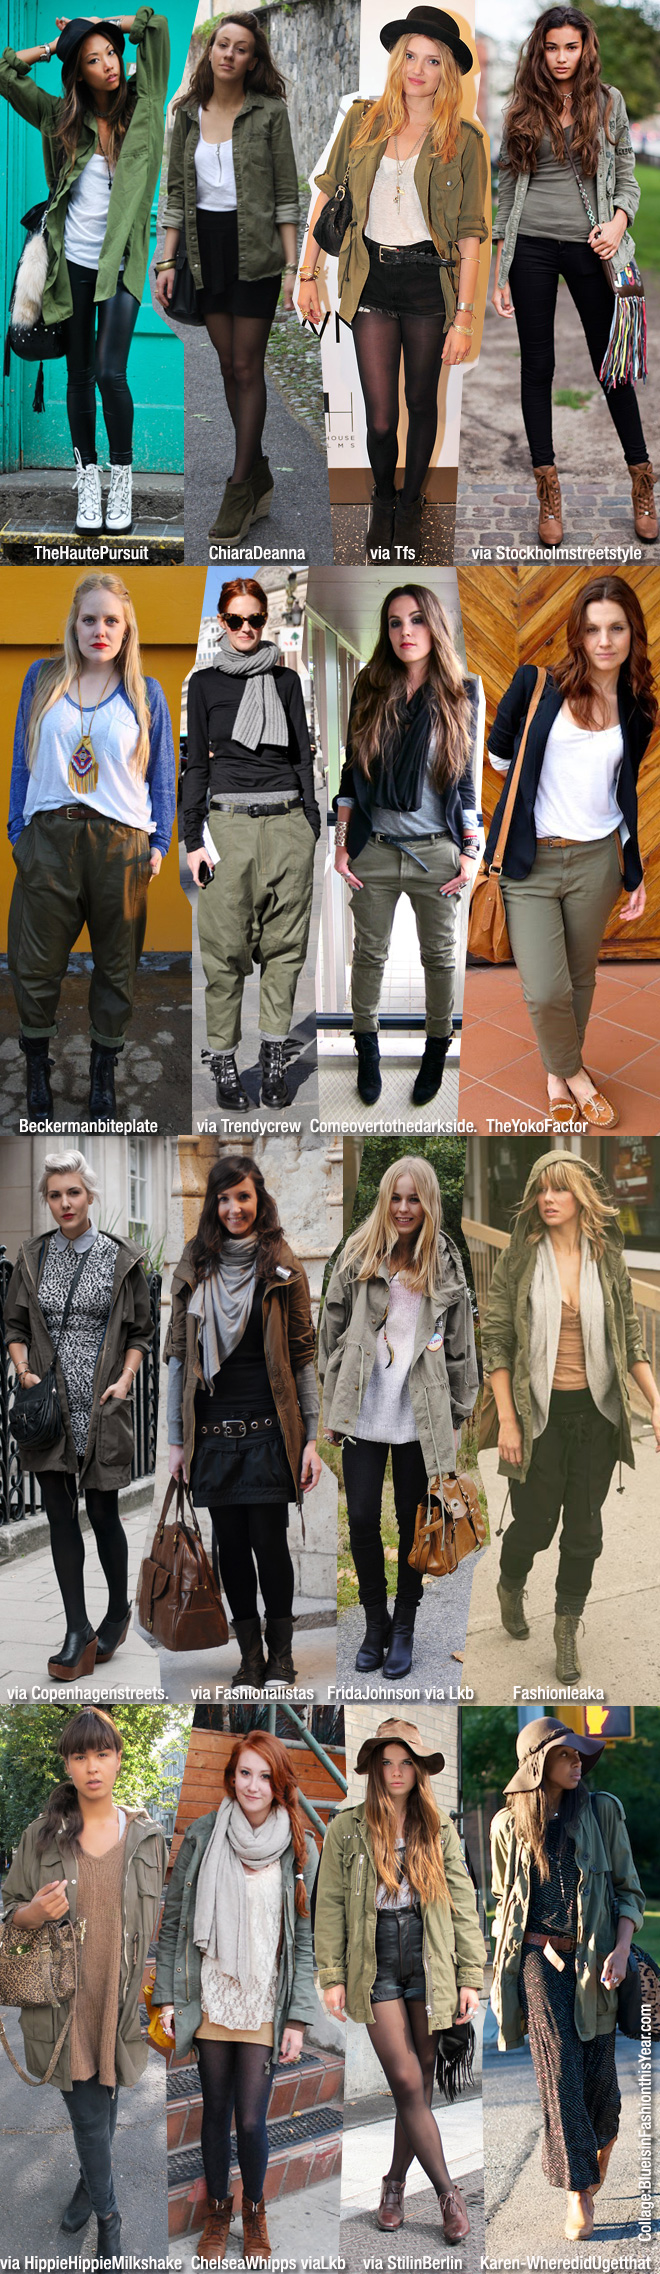 tops to wear with army green pants